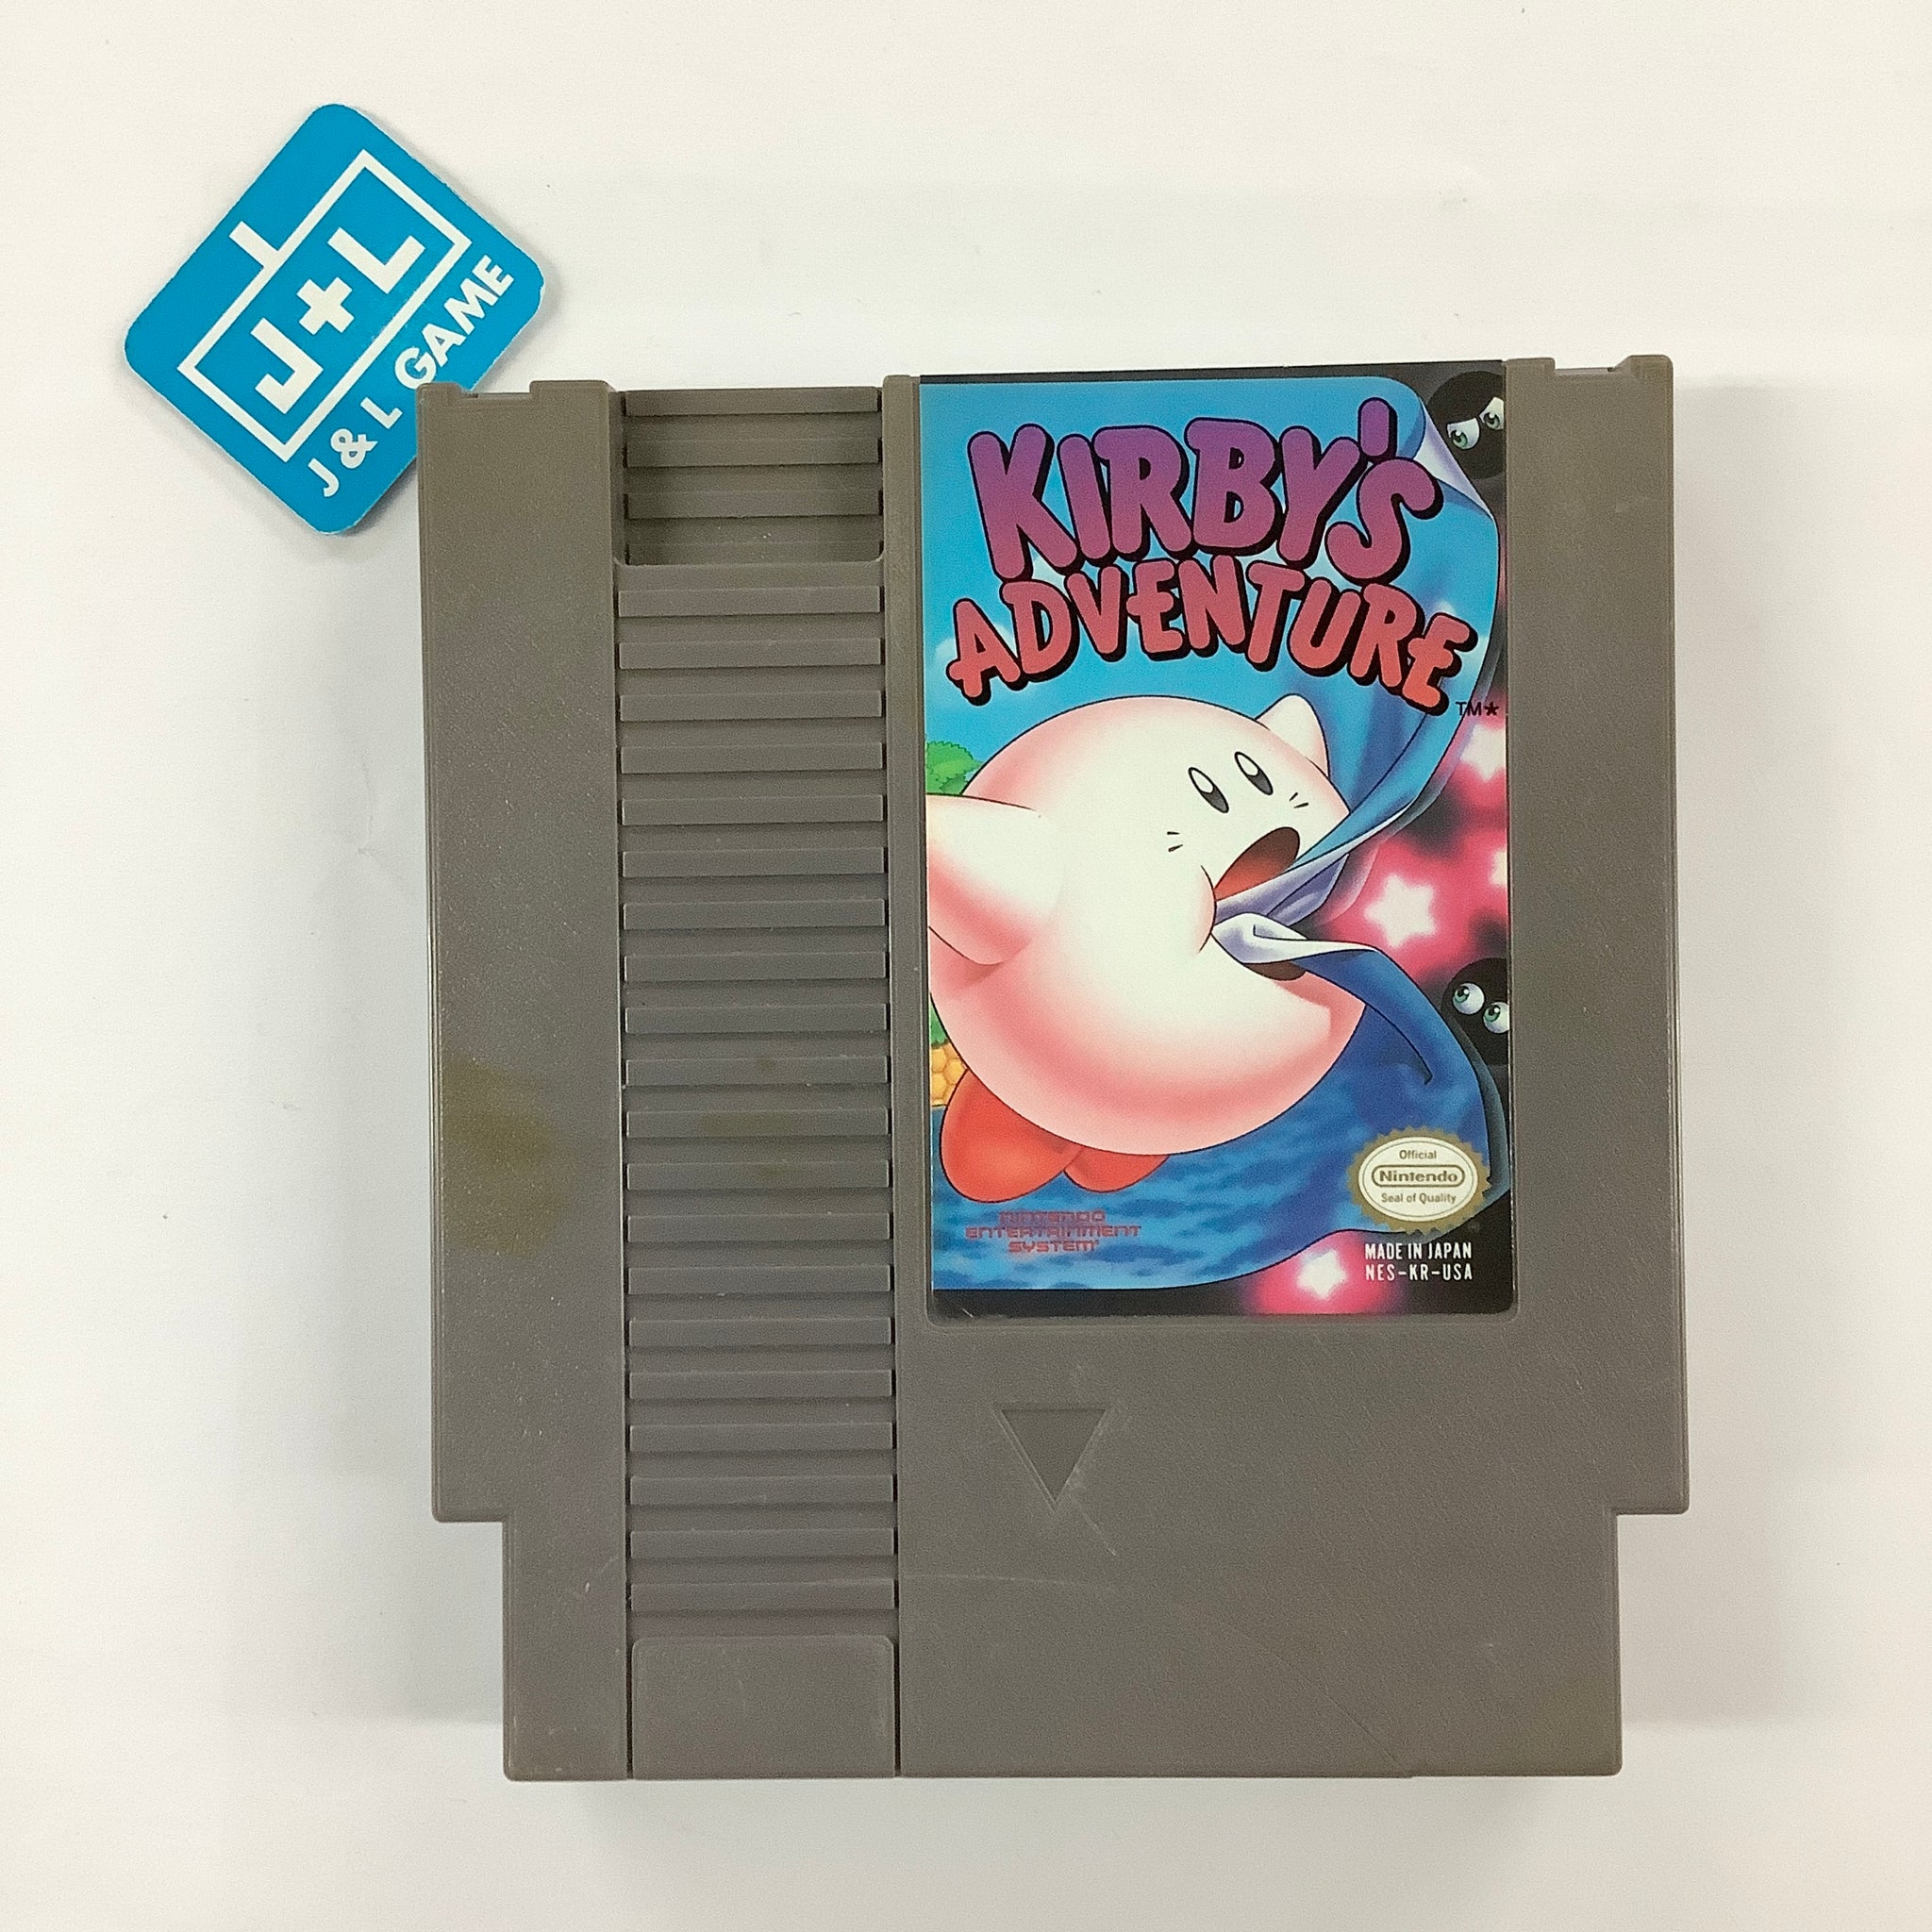  Games - Kirby's Adventure